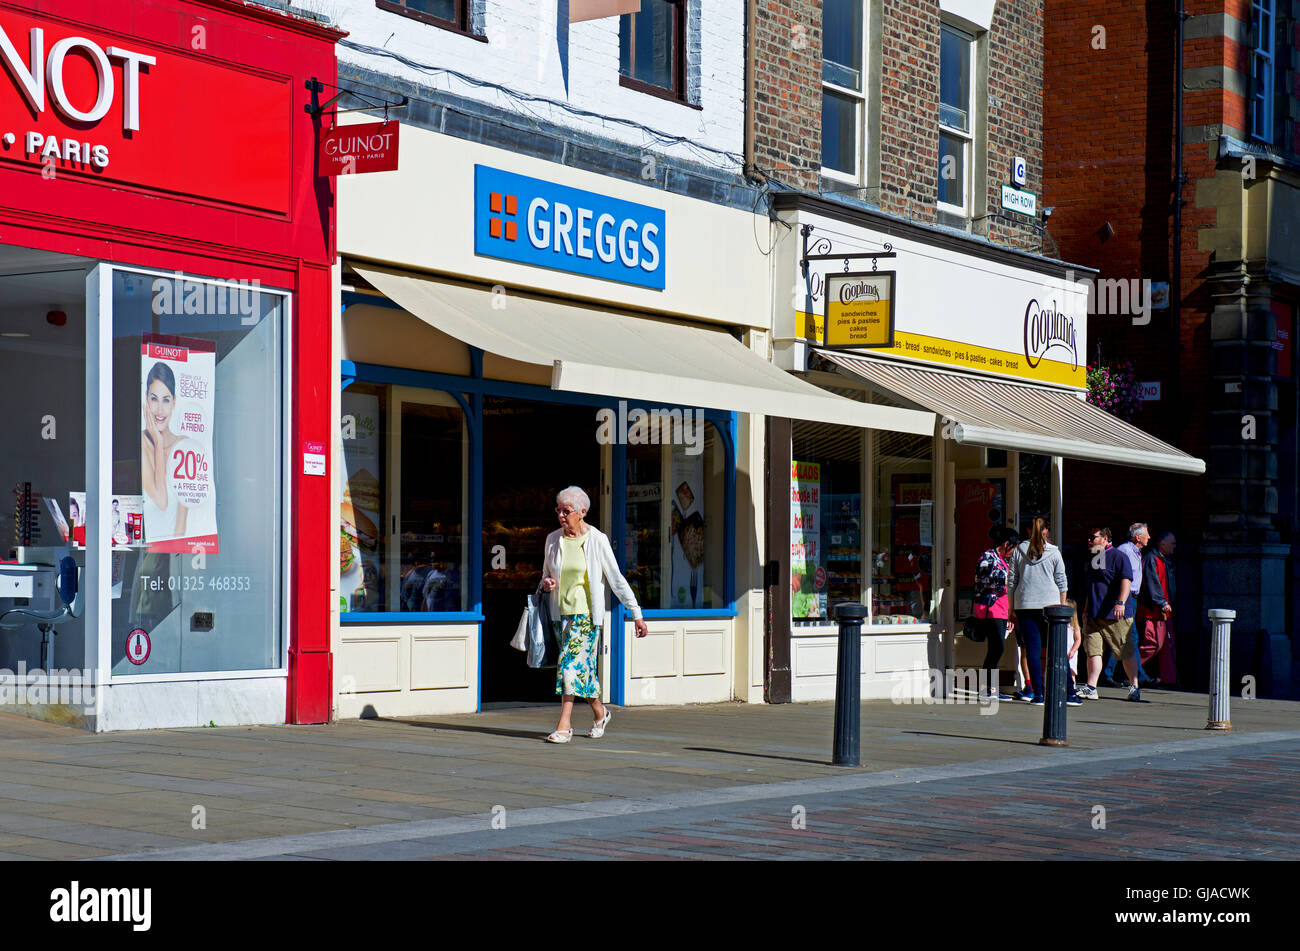 Branch of Greggs the bakers, England UK Stock Photo